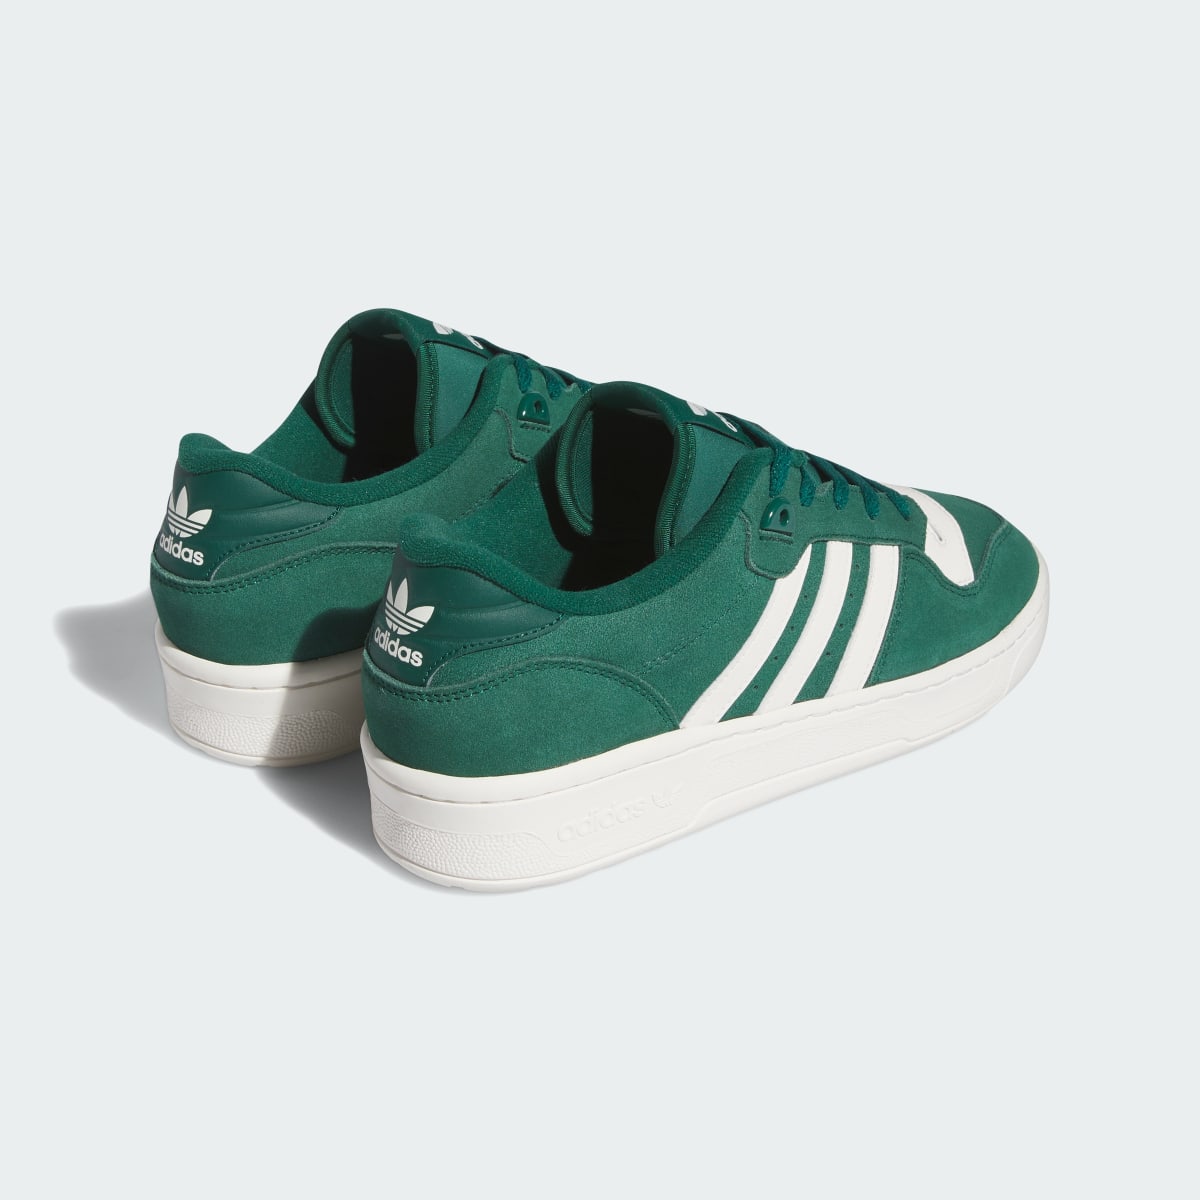 Adidas Sapatilhas Rivalry Low. 6